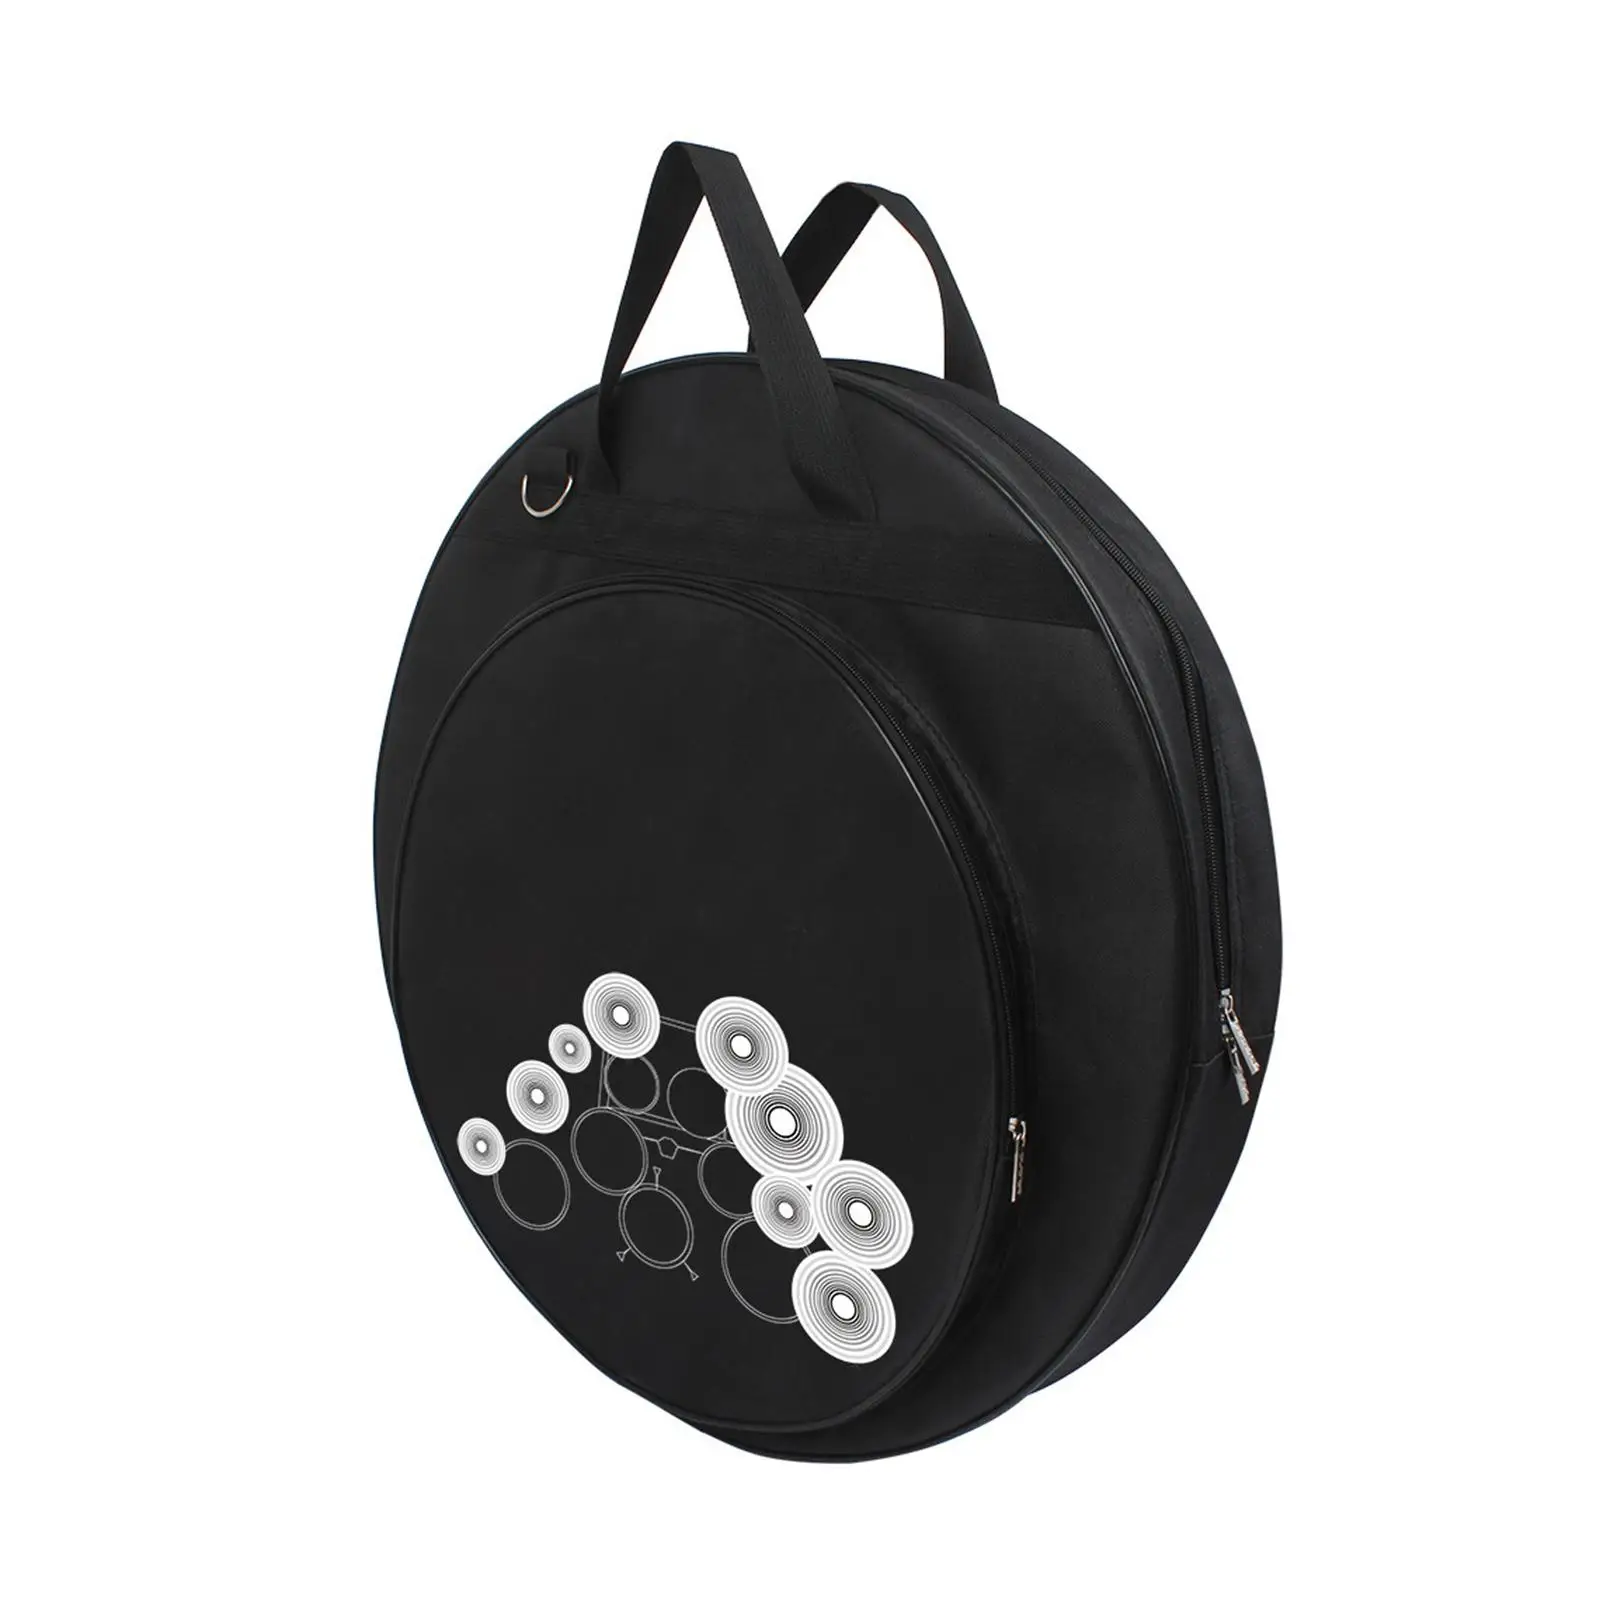 21 inch Cymbal Bag Multifunction Cymbal Carrying Case Cymbal Holder Pouch Cymbal Handbag for Drum Instrument Accessories Cymbal